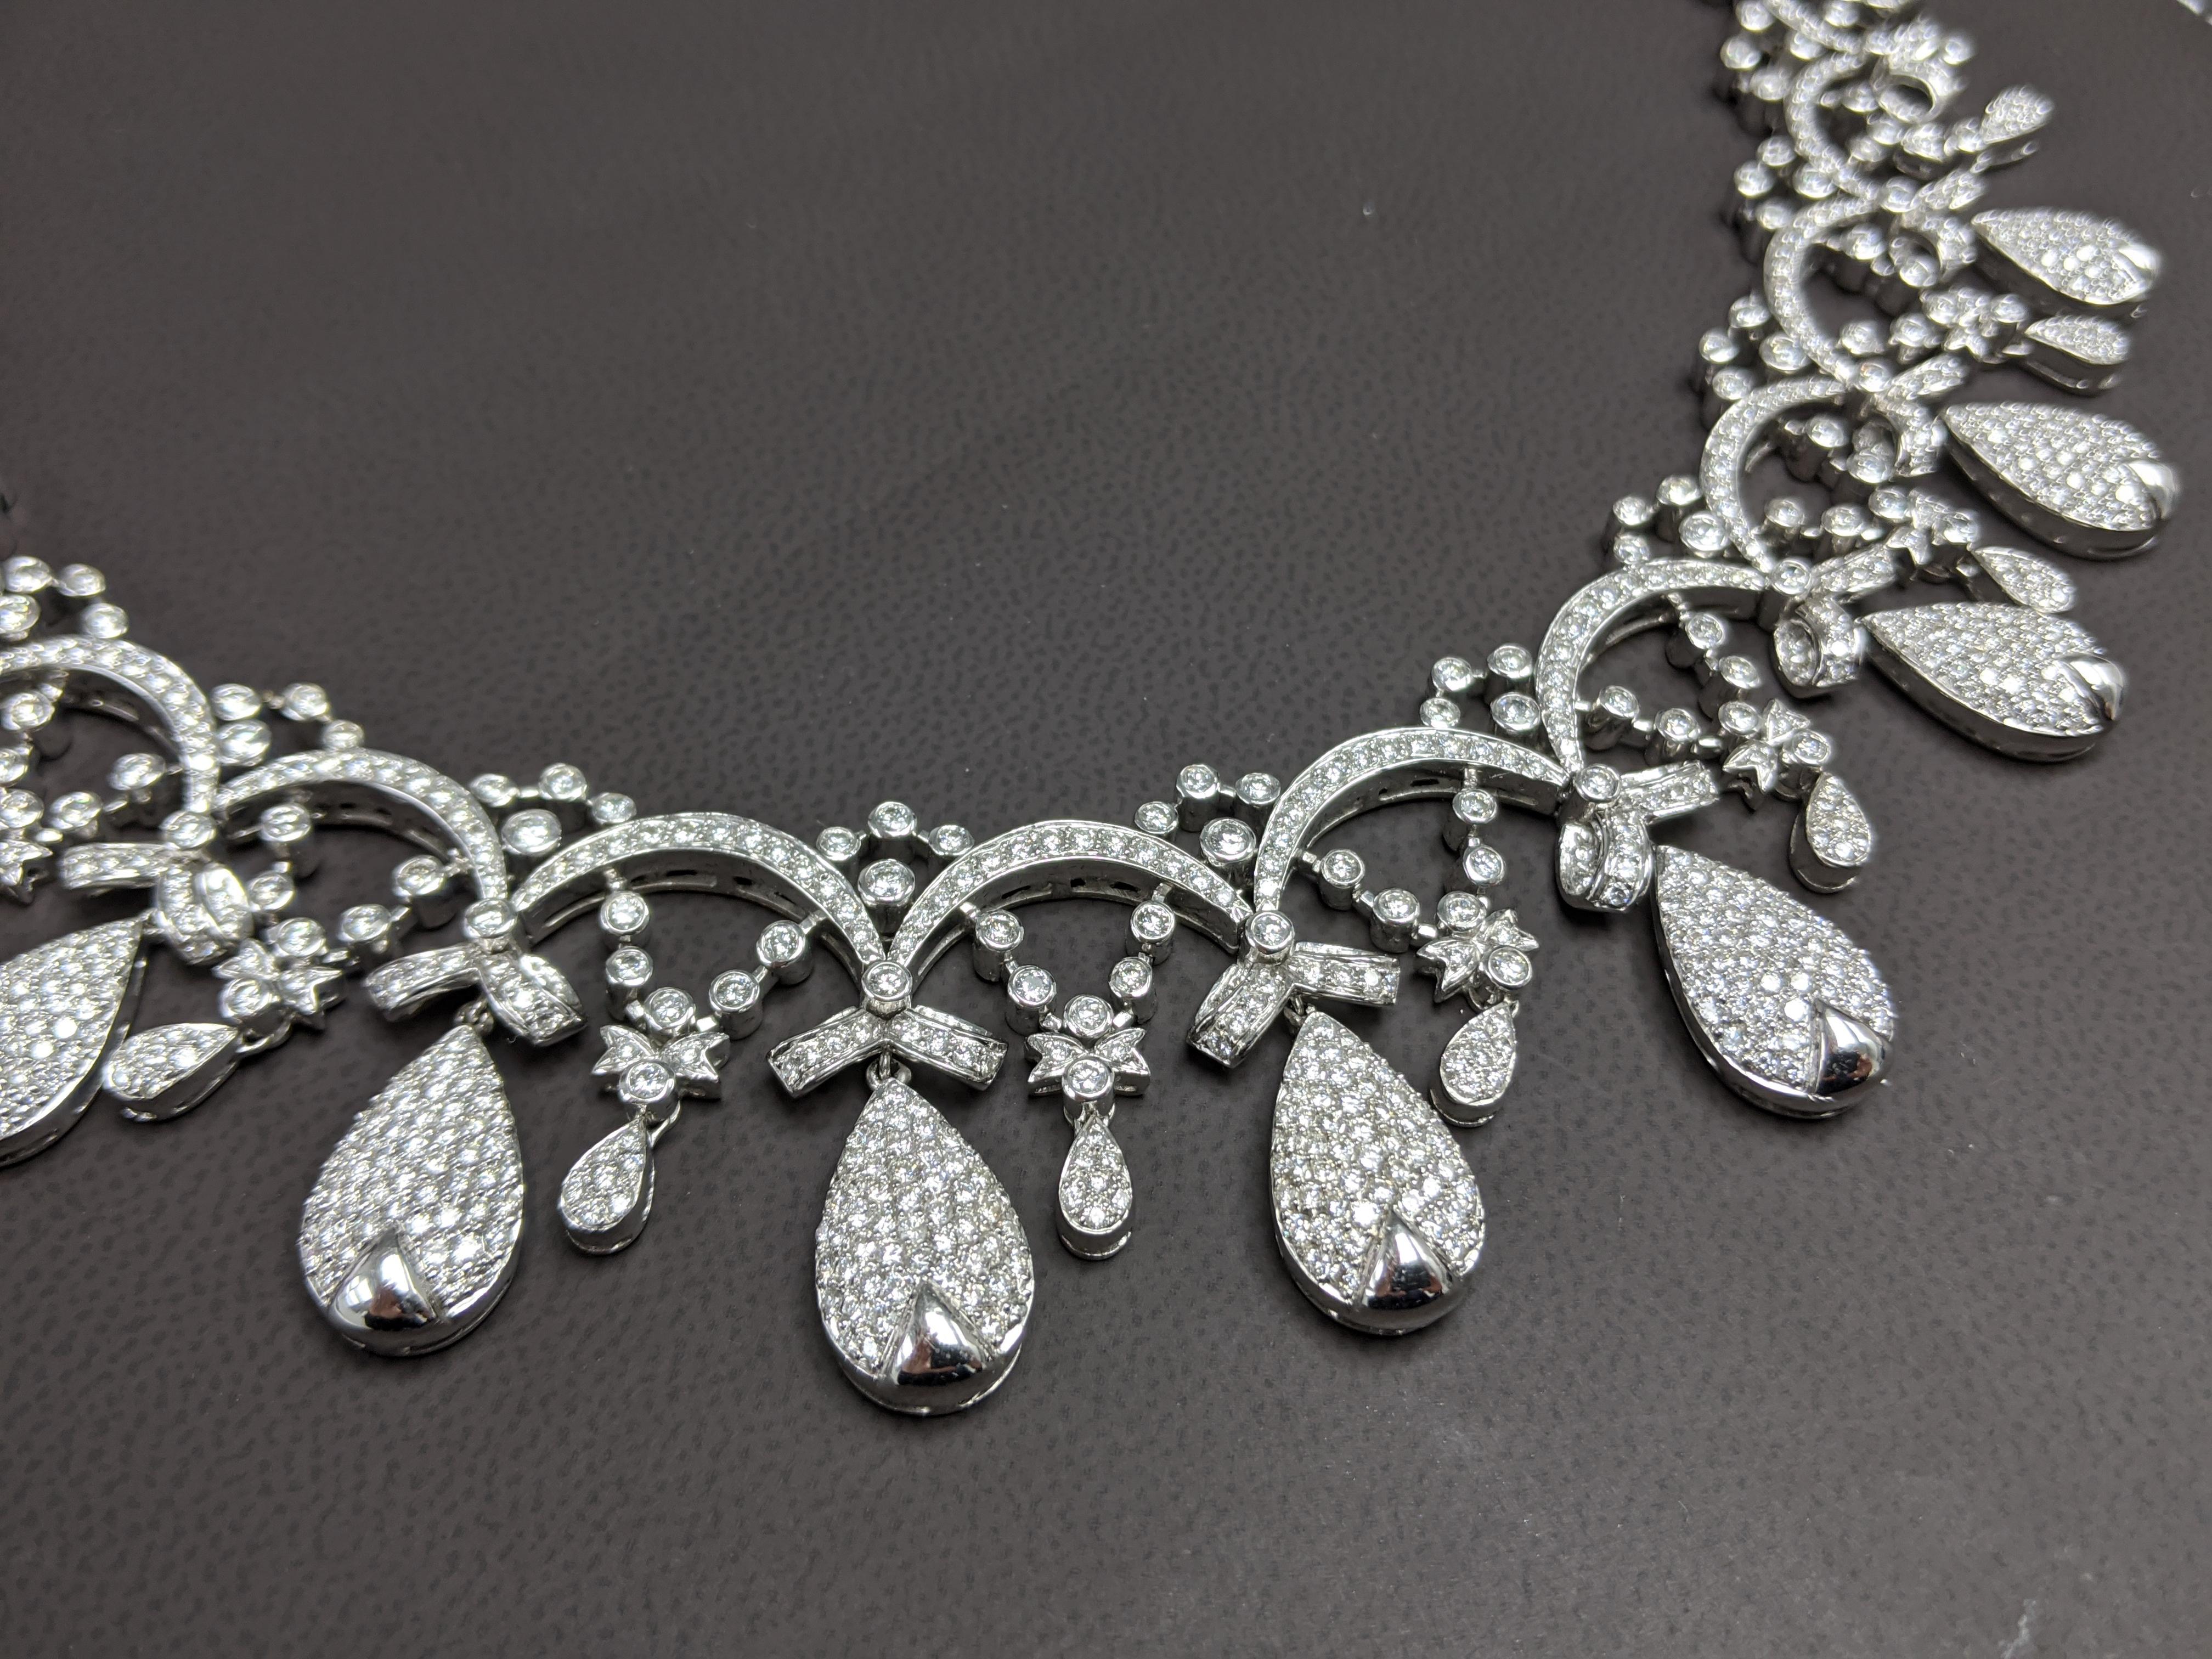 26K Diamonds Elegant Necklace Tiara Style

Hand Made, One Of A Kind!